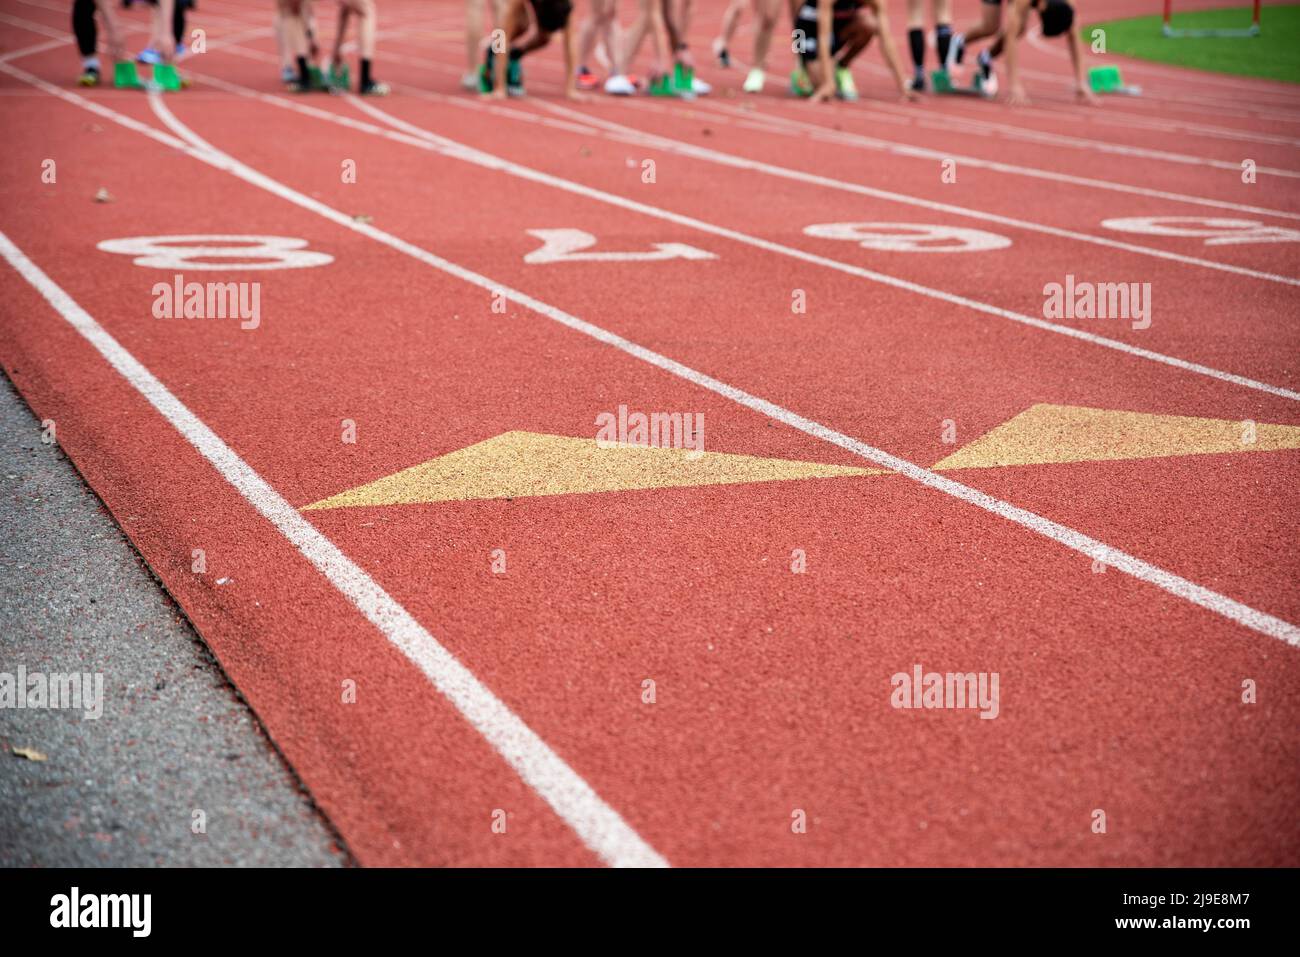 Runners at the starting blocks on an athletic racing track Stock Photo